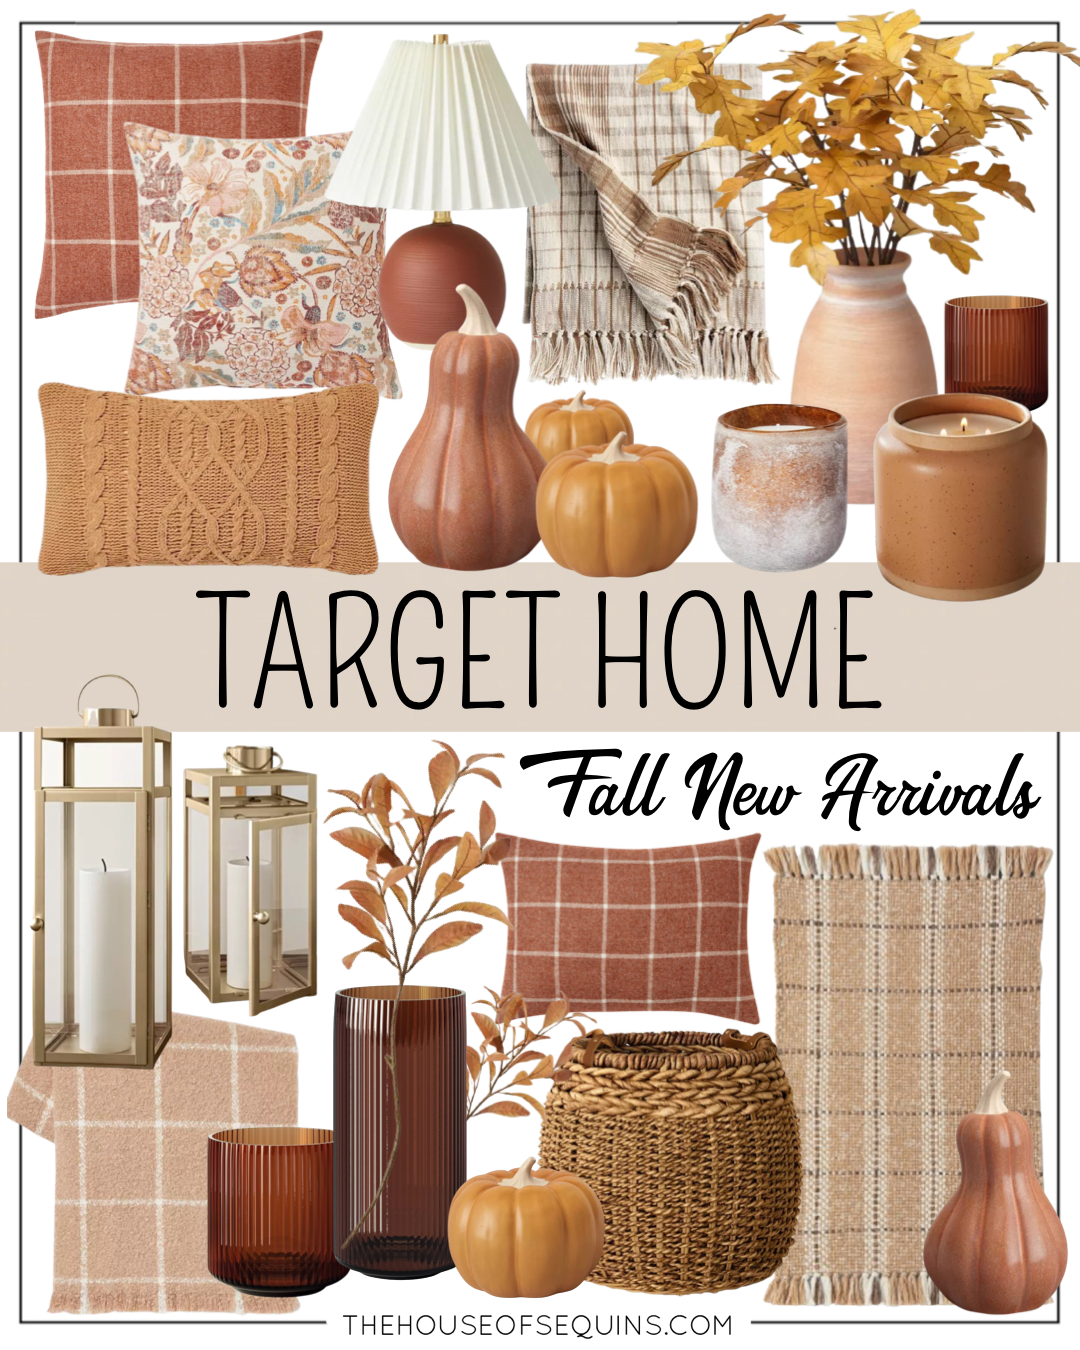 Blogger Sarah Lindner of The House of Sequins sharing Target Home fall decor.